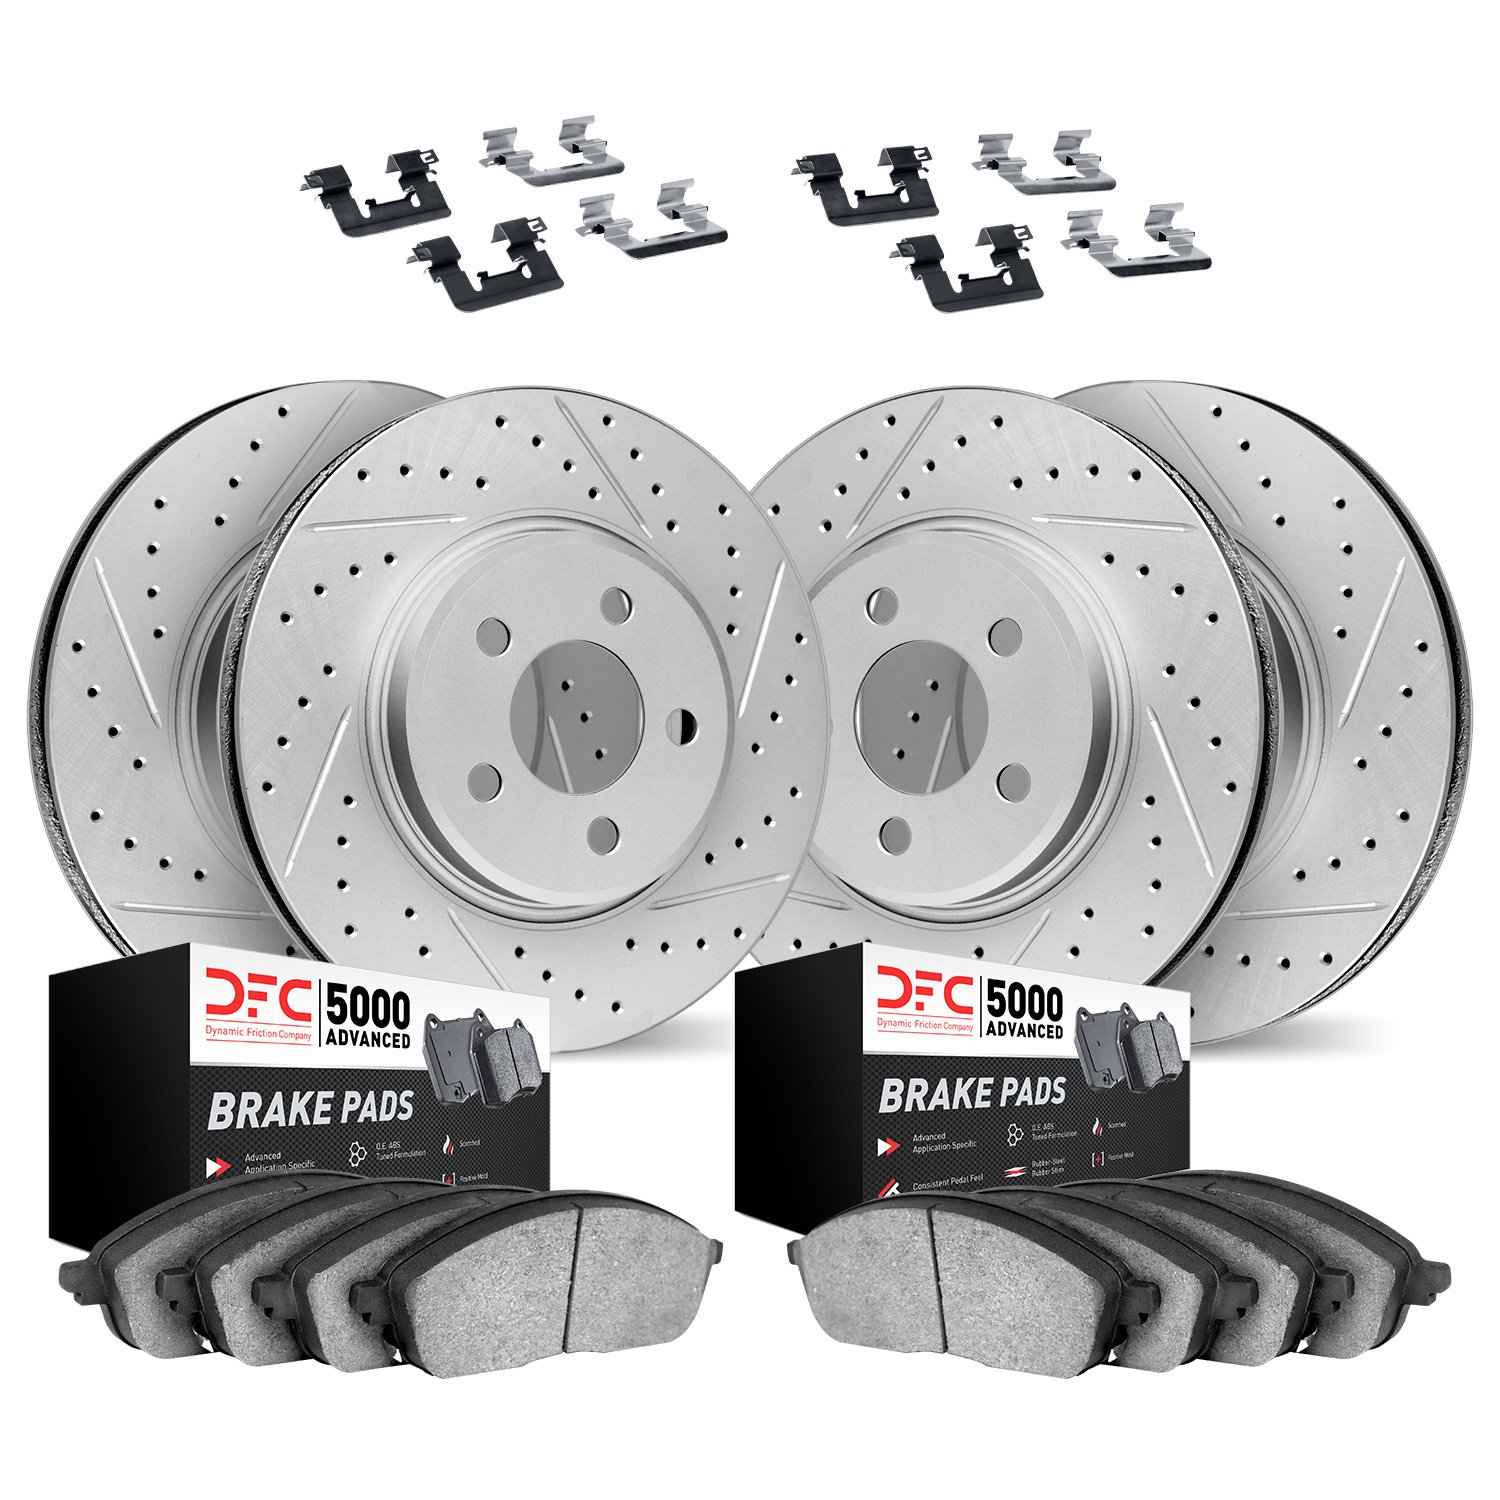 2514-13035 Geoperformance Drilled/Slotted Rotors w/5000 Advanced Brake Pads Kit & Hardware, 2014-2018 Subaru, Position: Front an